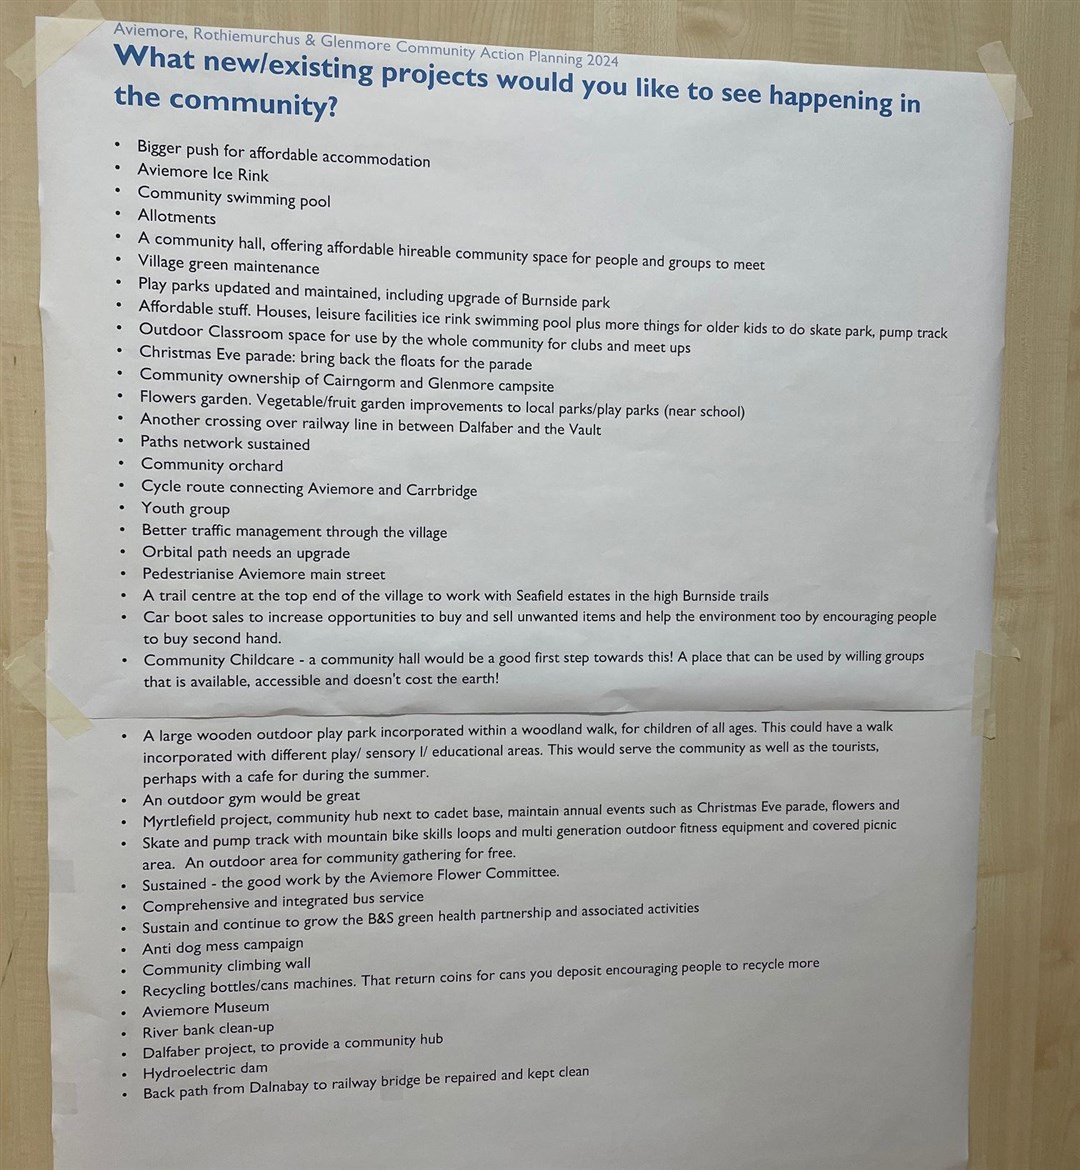 Residents were asked what new/existing projects would you like to see happening in the community.